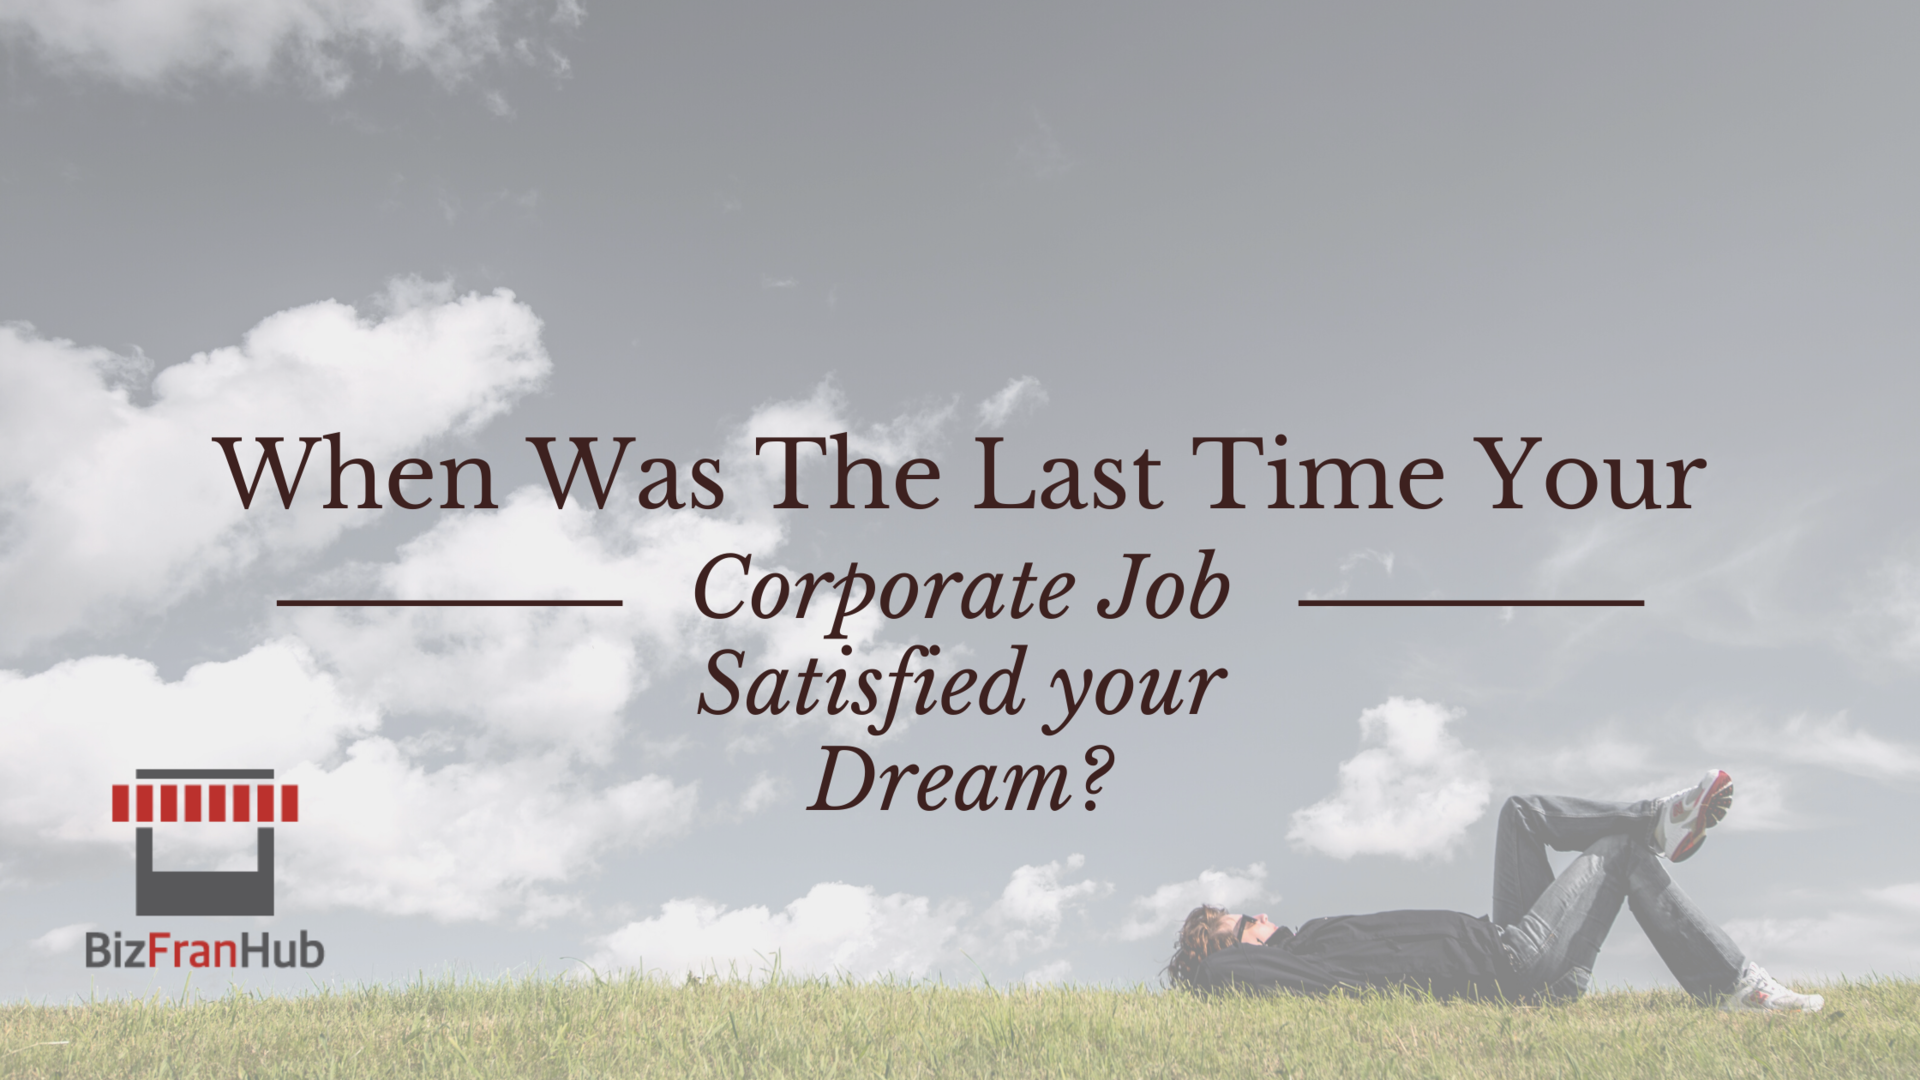 When Was The Last Time Your Corporate Job Satisfied Your Dream?